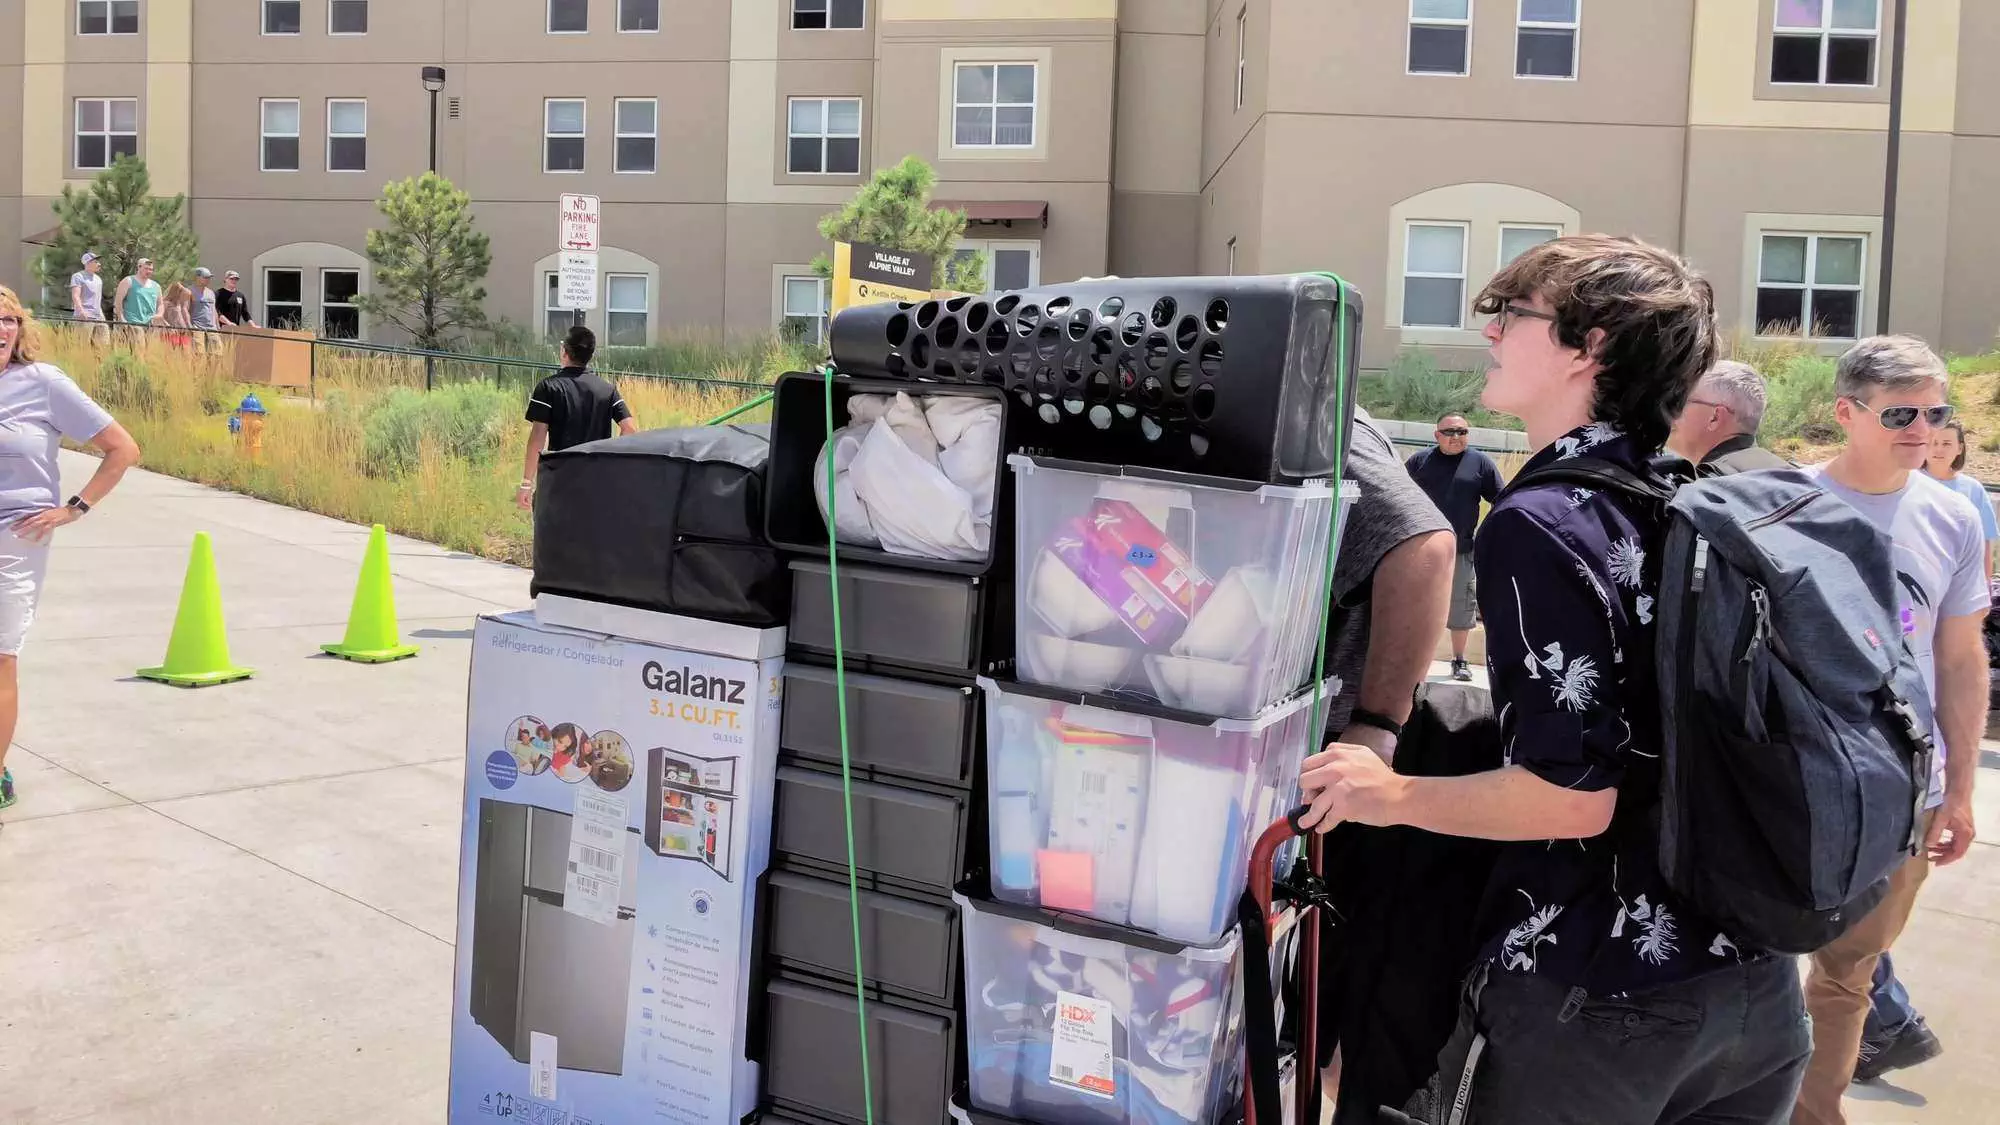 college student moving in who used a college move in checklist to have everything he needed